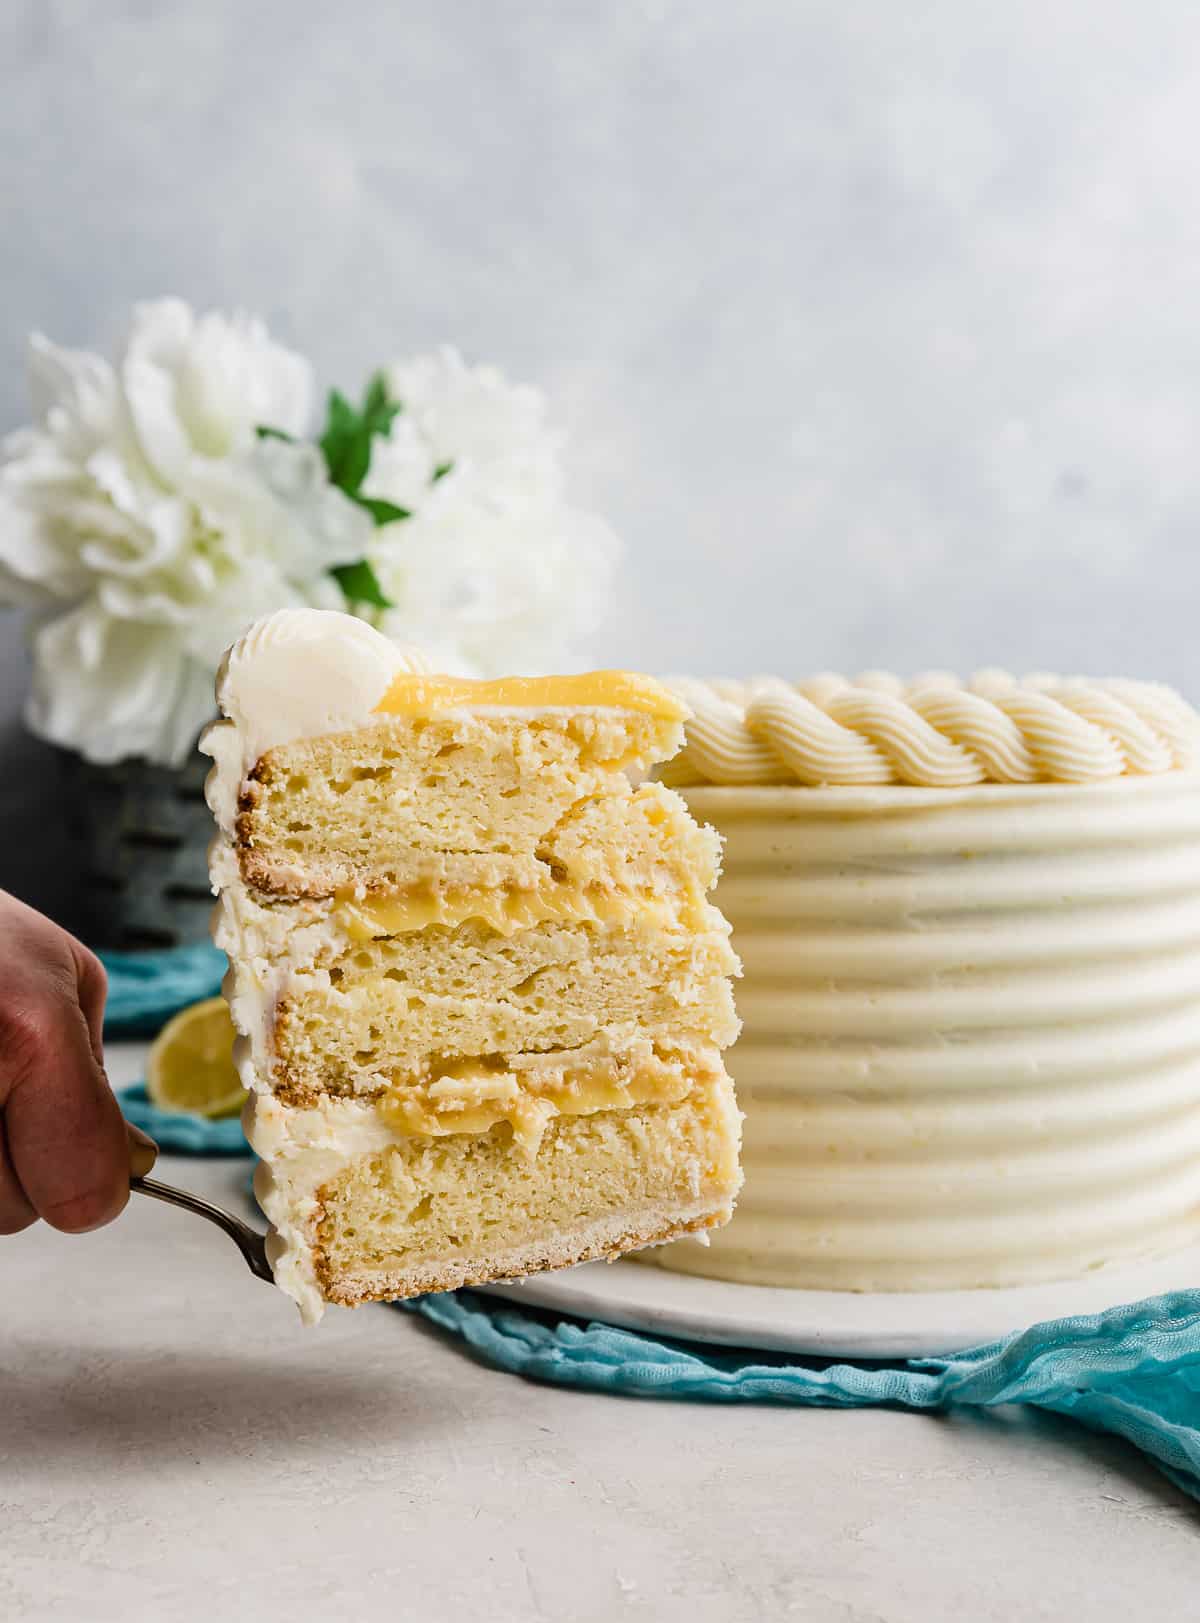 A slice of lemon bar layer cake being held up in front of the full cake.